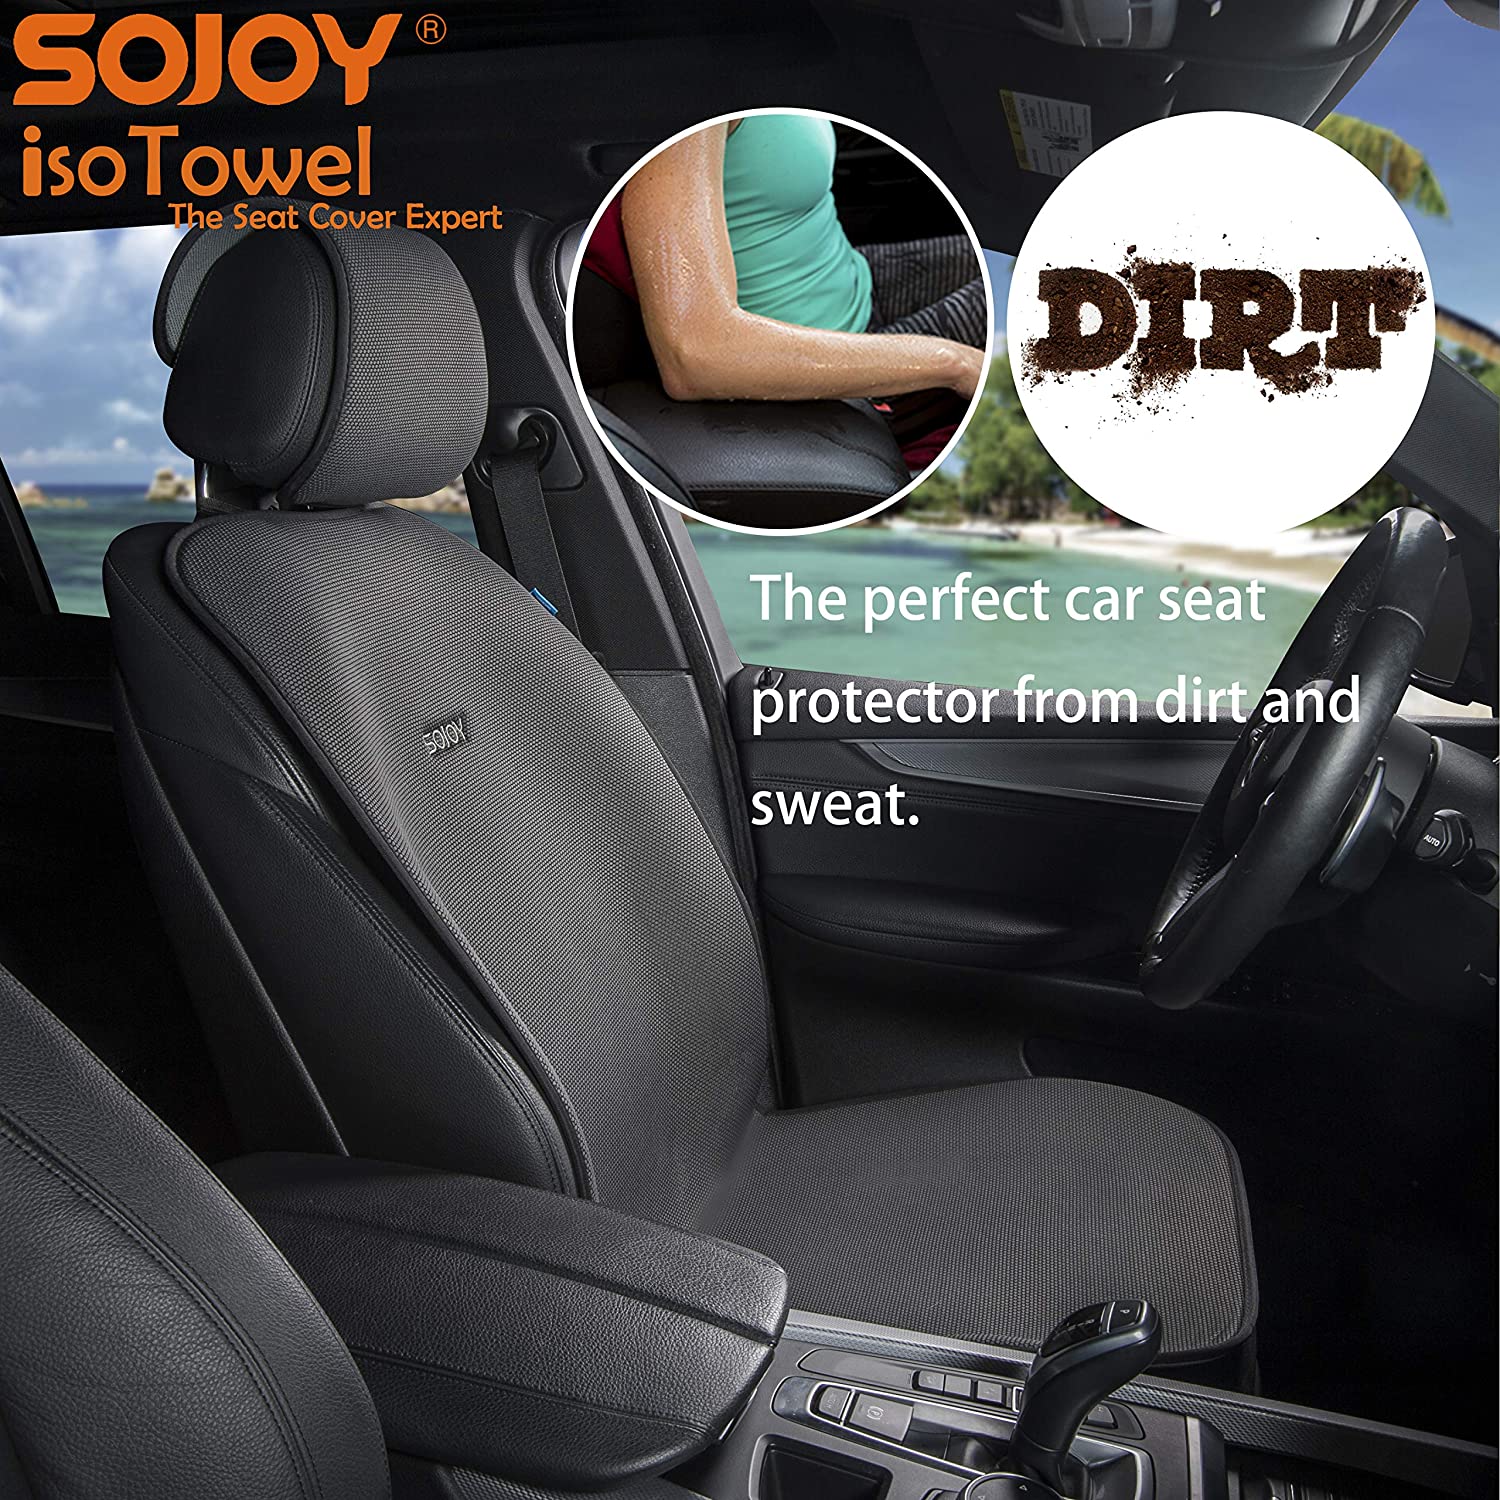 Sojoy Car Seat Cover Microfiber Seat Protector, With Quick-Dry, No-Slip  Technology. Car seat Protection for All Workouts, Honeycomb Cloth  All-Weather (Black and Gray)